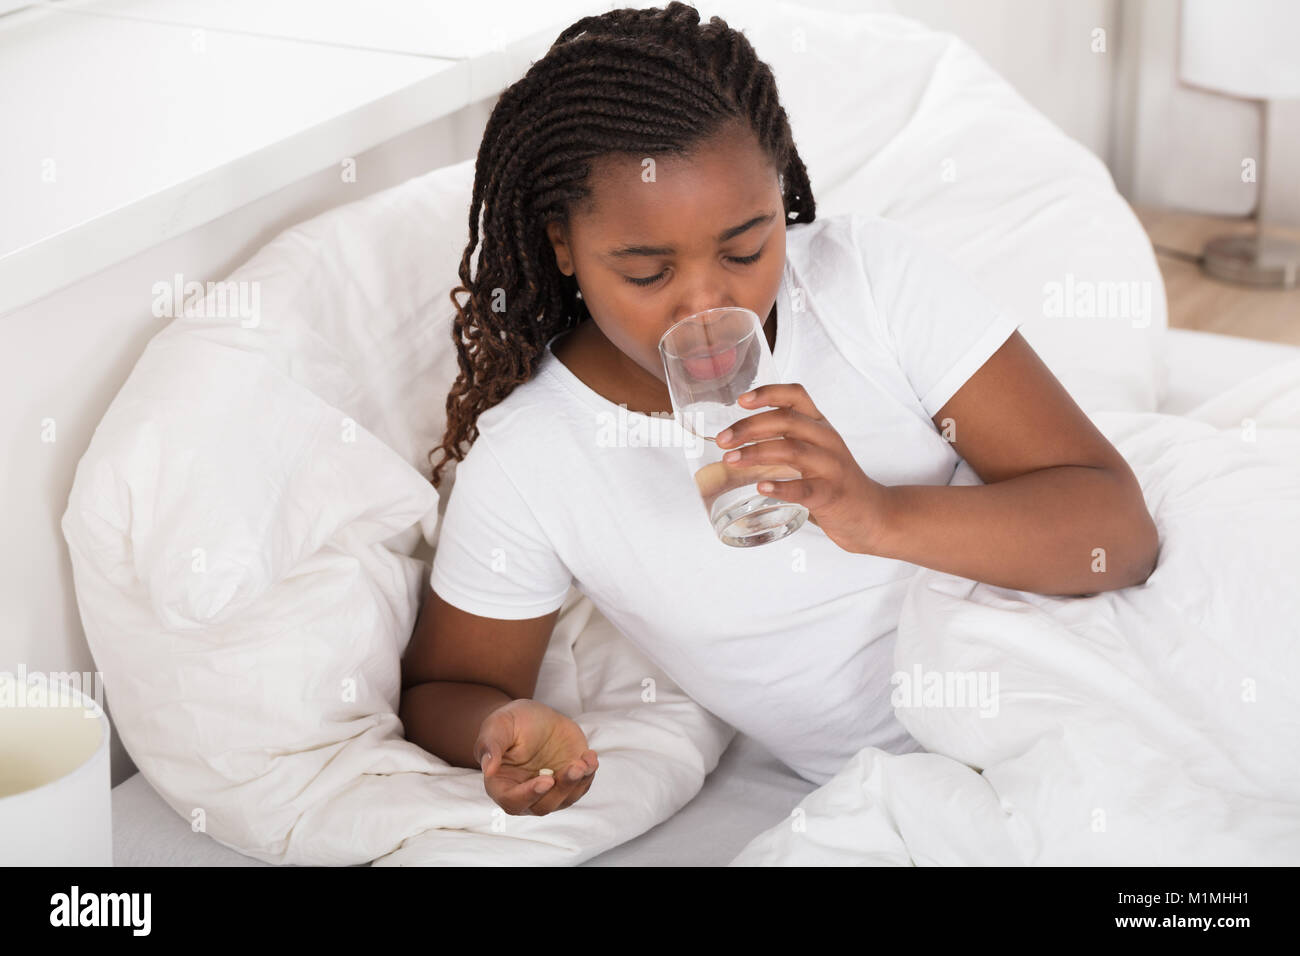 Sick African Girl In Bed Drinking Water While Taking Pill Stock Photo